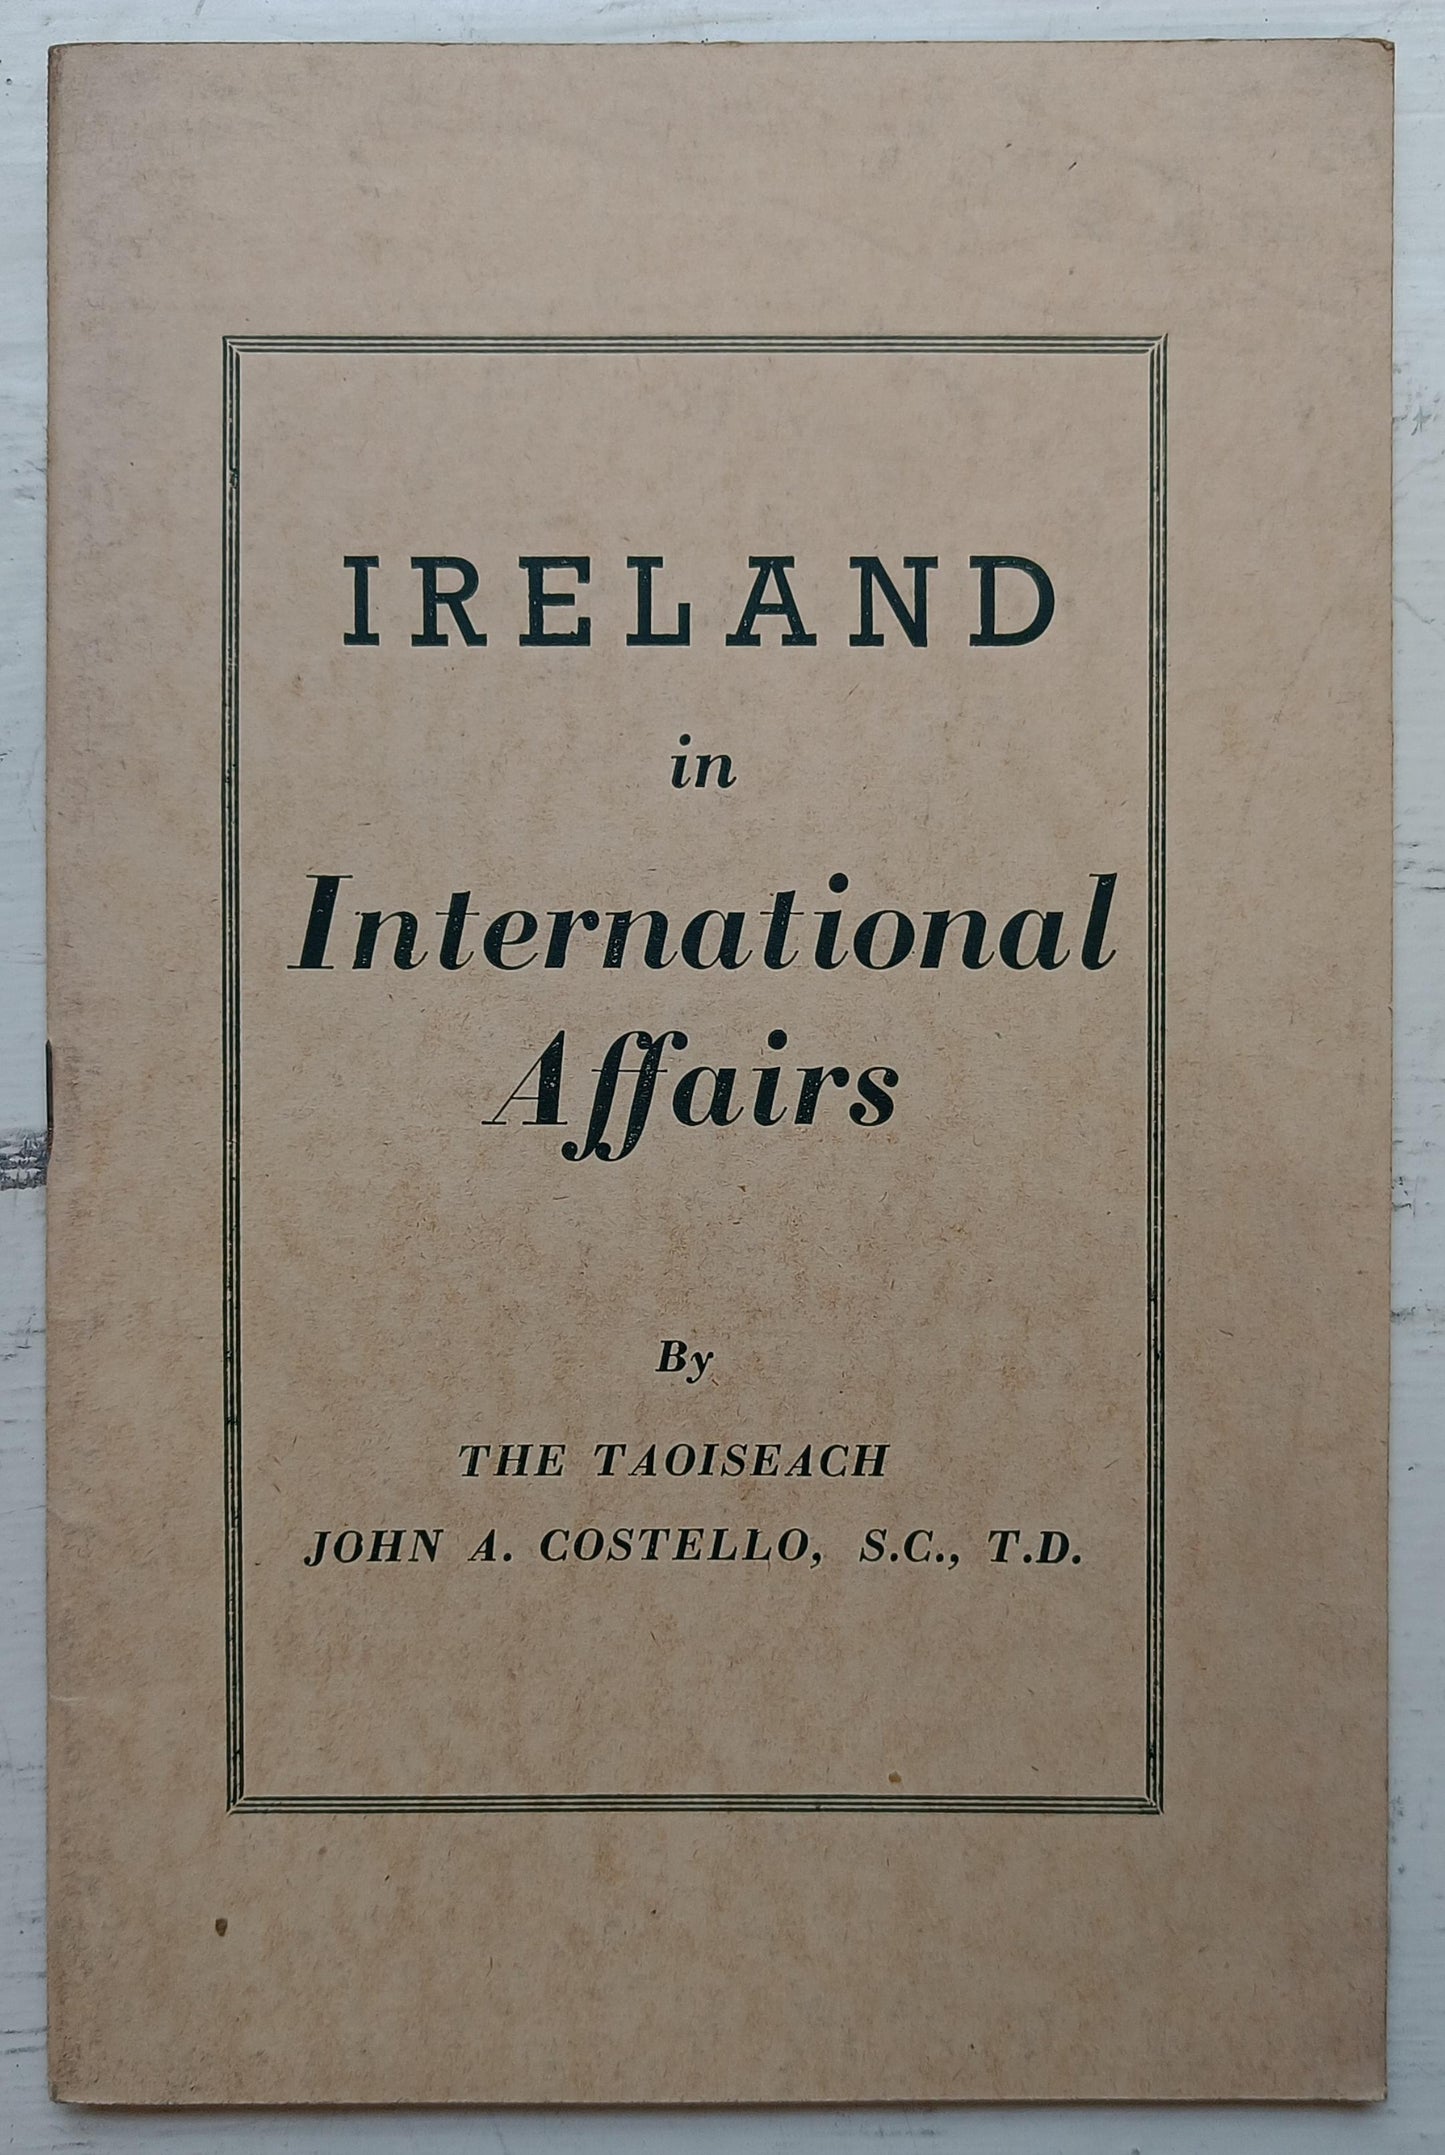 PAMPHLET BUNDLE: Texts on Ireland by John A. Costello